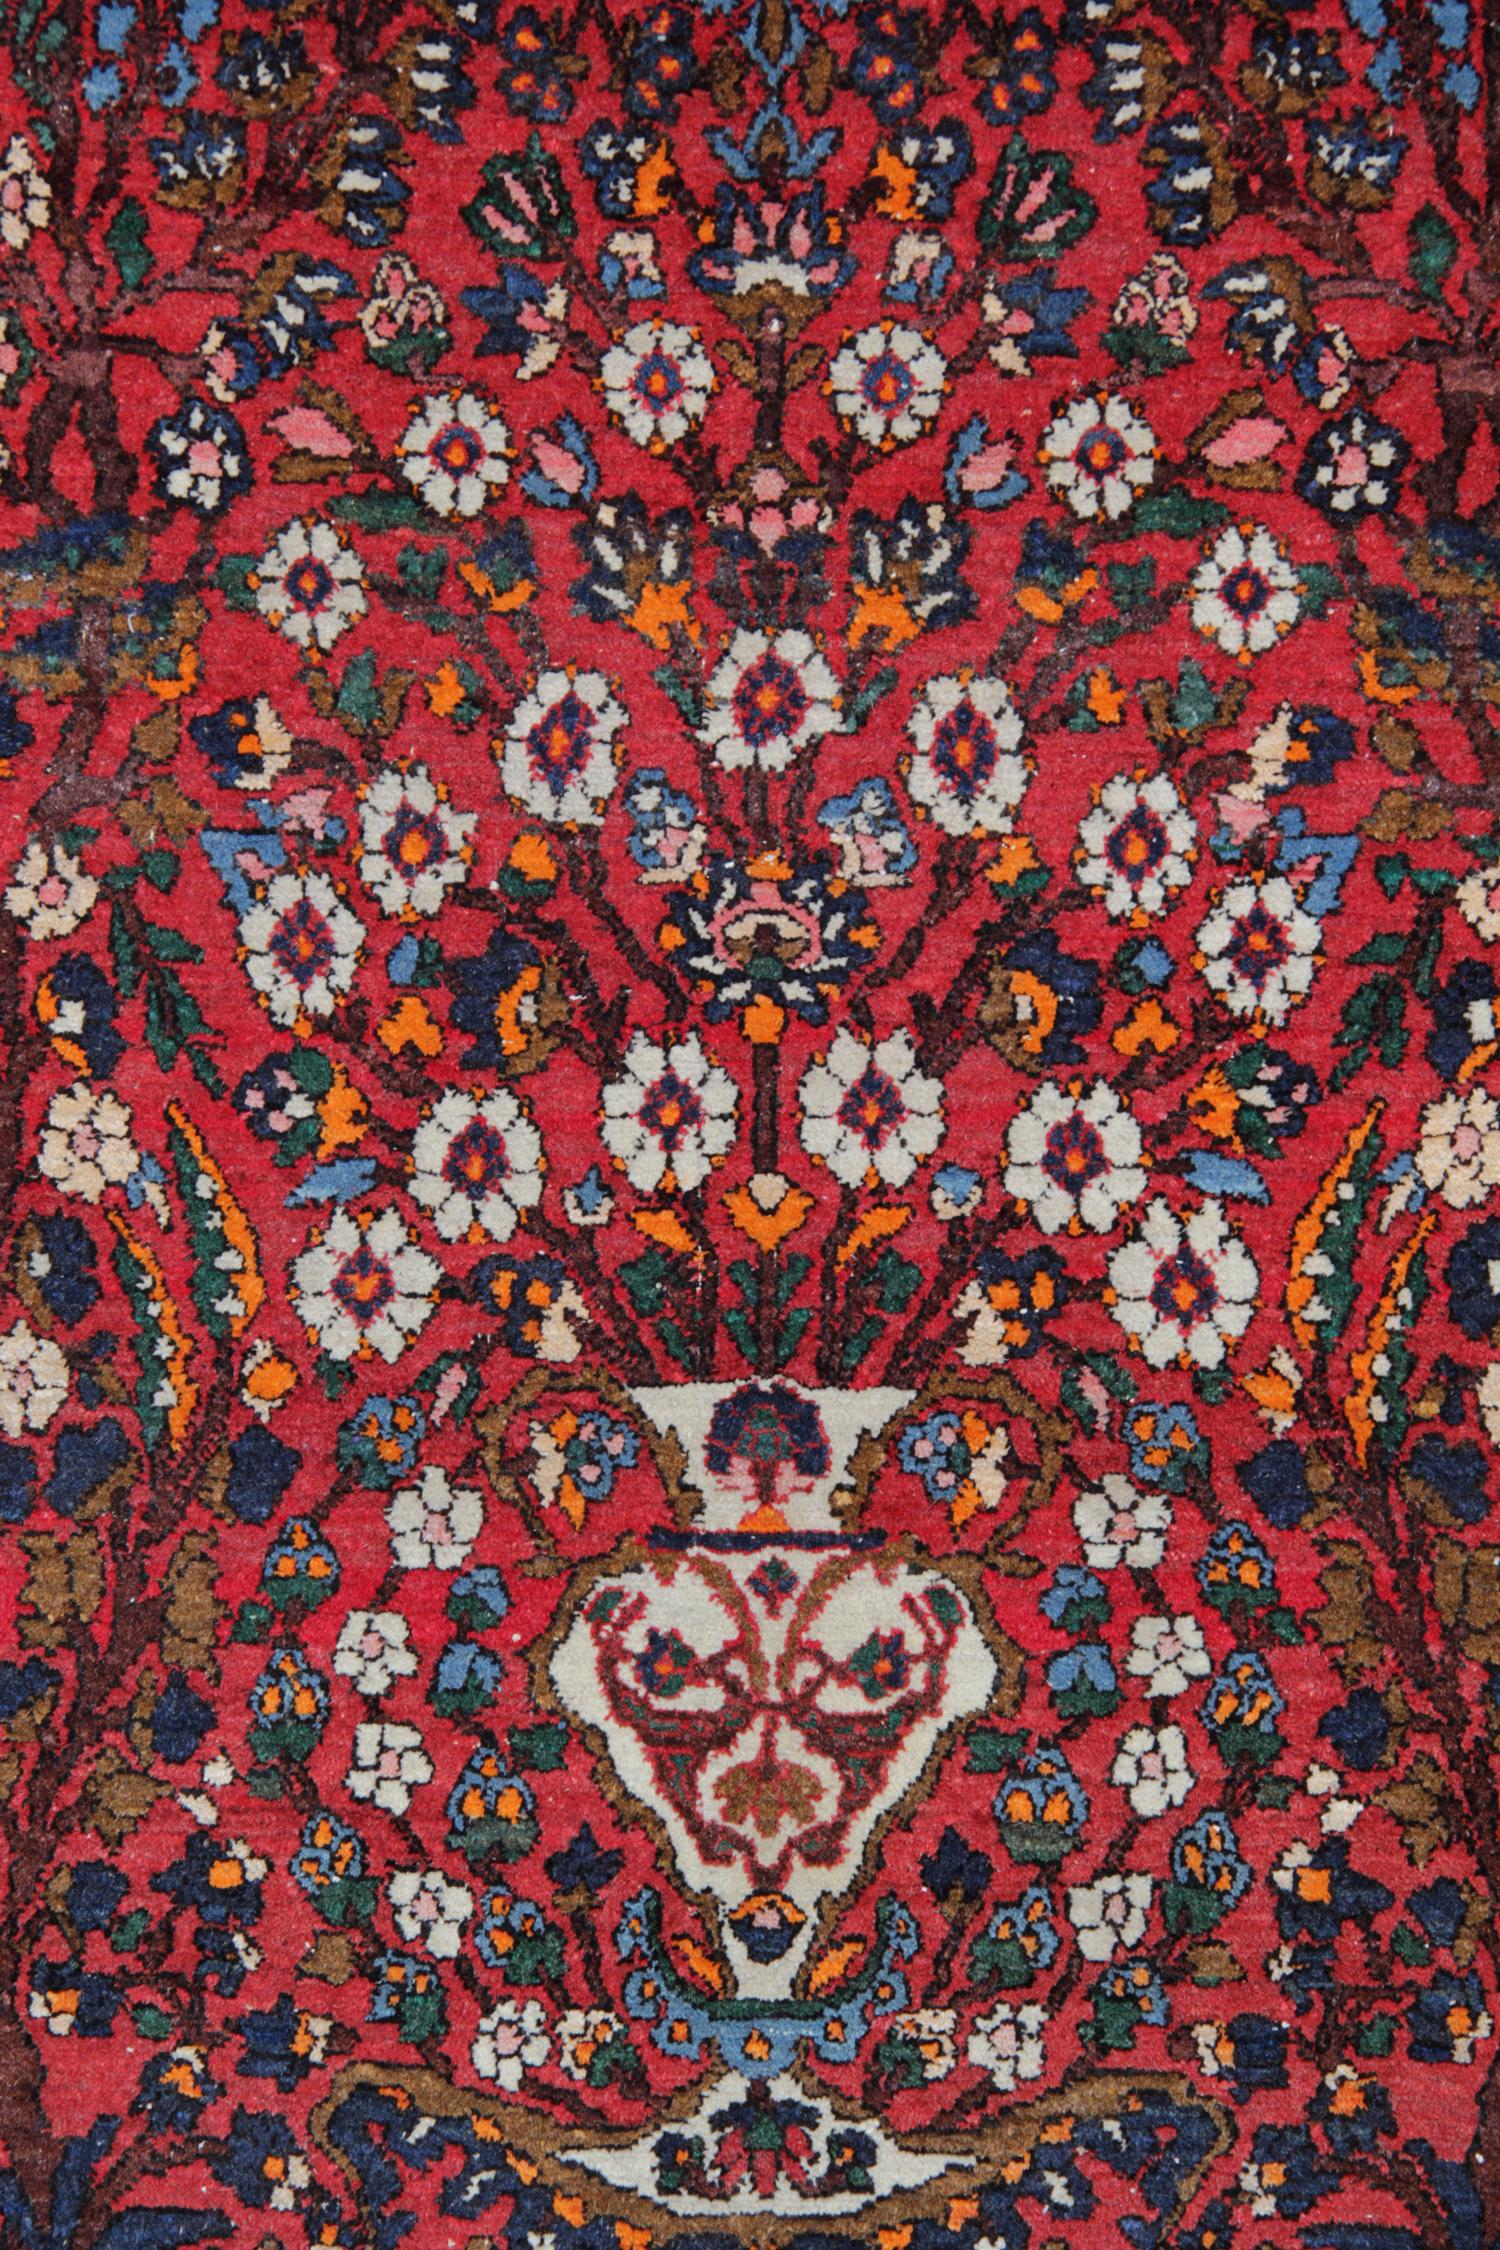 This fine antique rug was woven in the late 19th century, circa 1890 and features a beautiful red field with a highly decorative central design. With a vase surrounded by floral and foliate motifs and scrolls that run through the centre and a highly